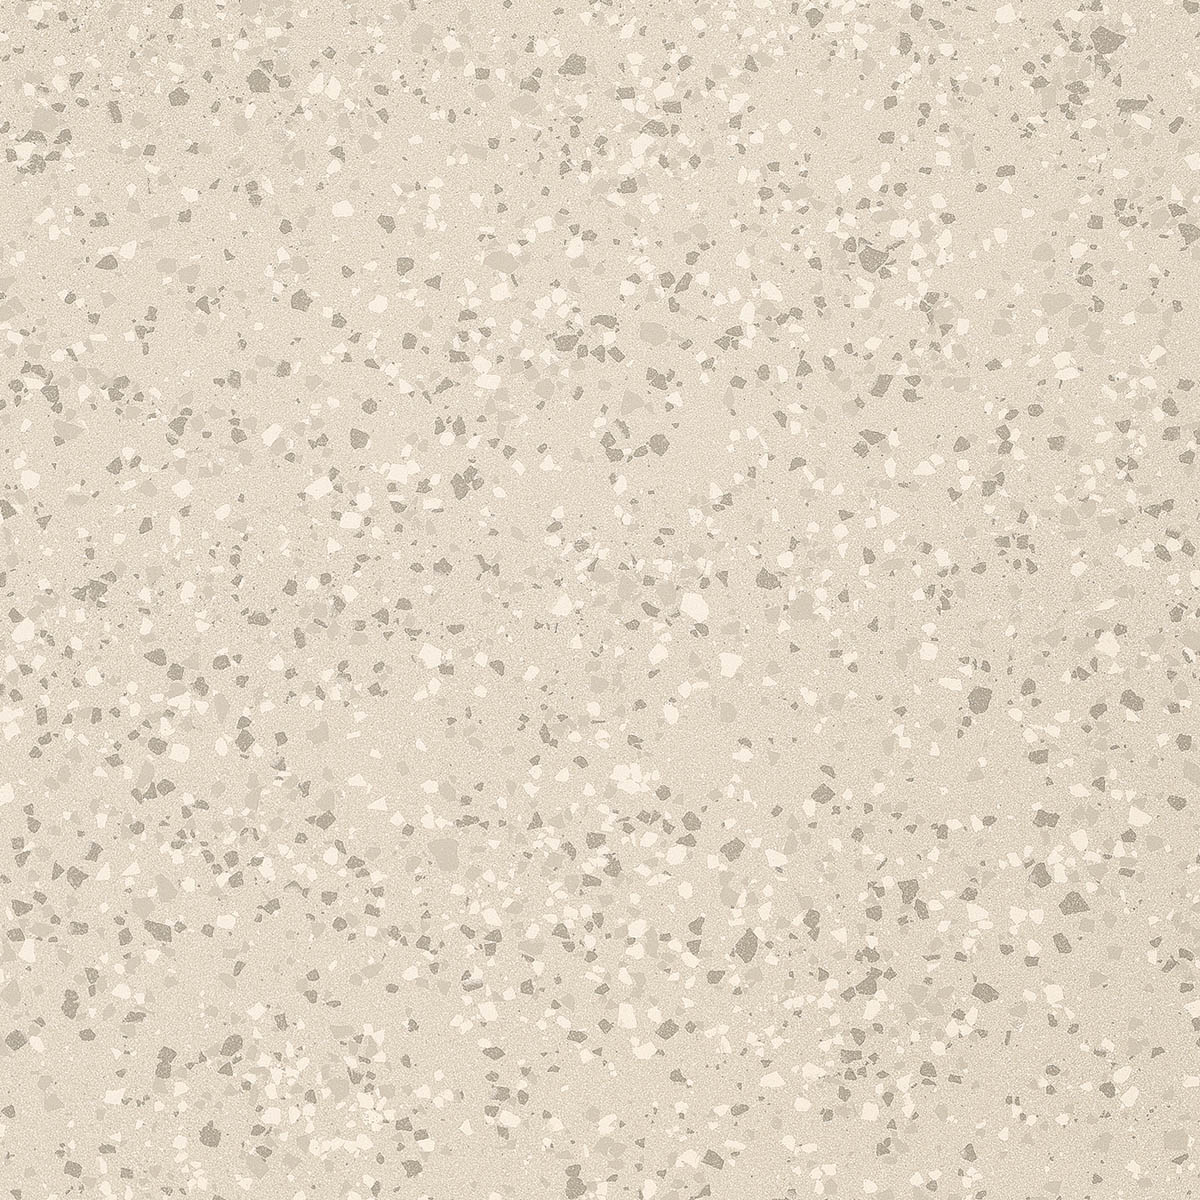 Imola Parade Bianco Natural Flat Matt Outdoor 166114 60x60cm rectified 10,5mm - PRDE RB60W RM